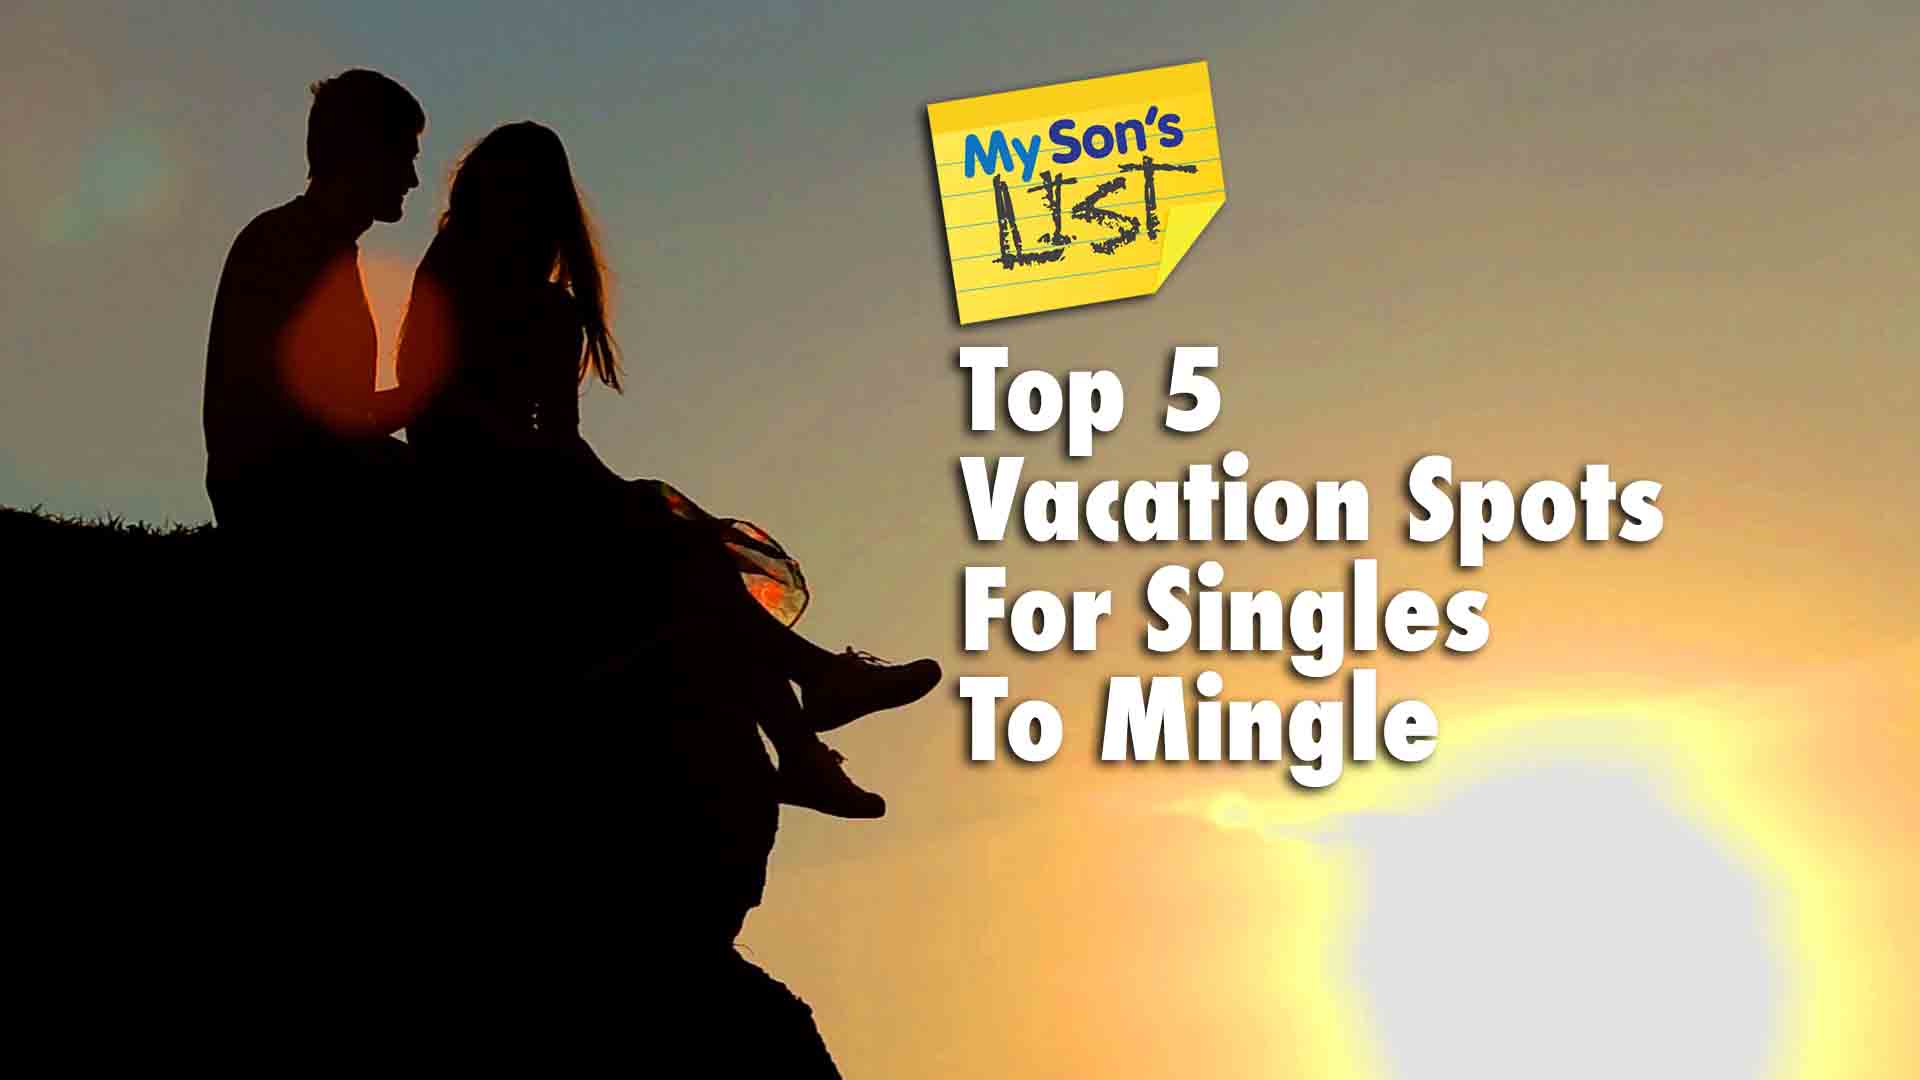 Top 5 Vacations Spots for Singles Looking to Mingle